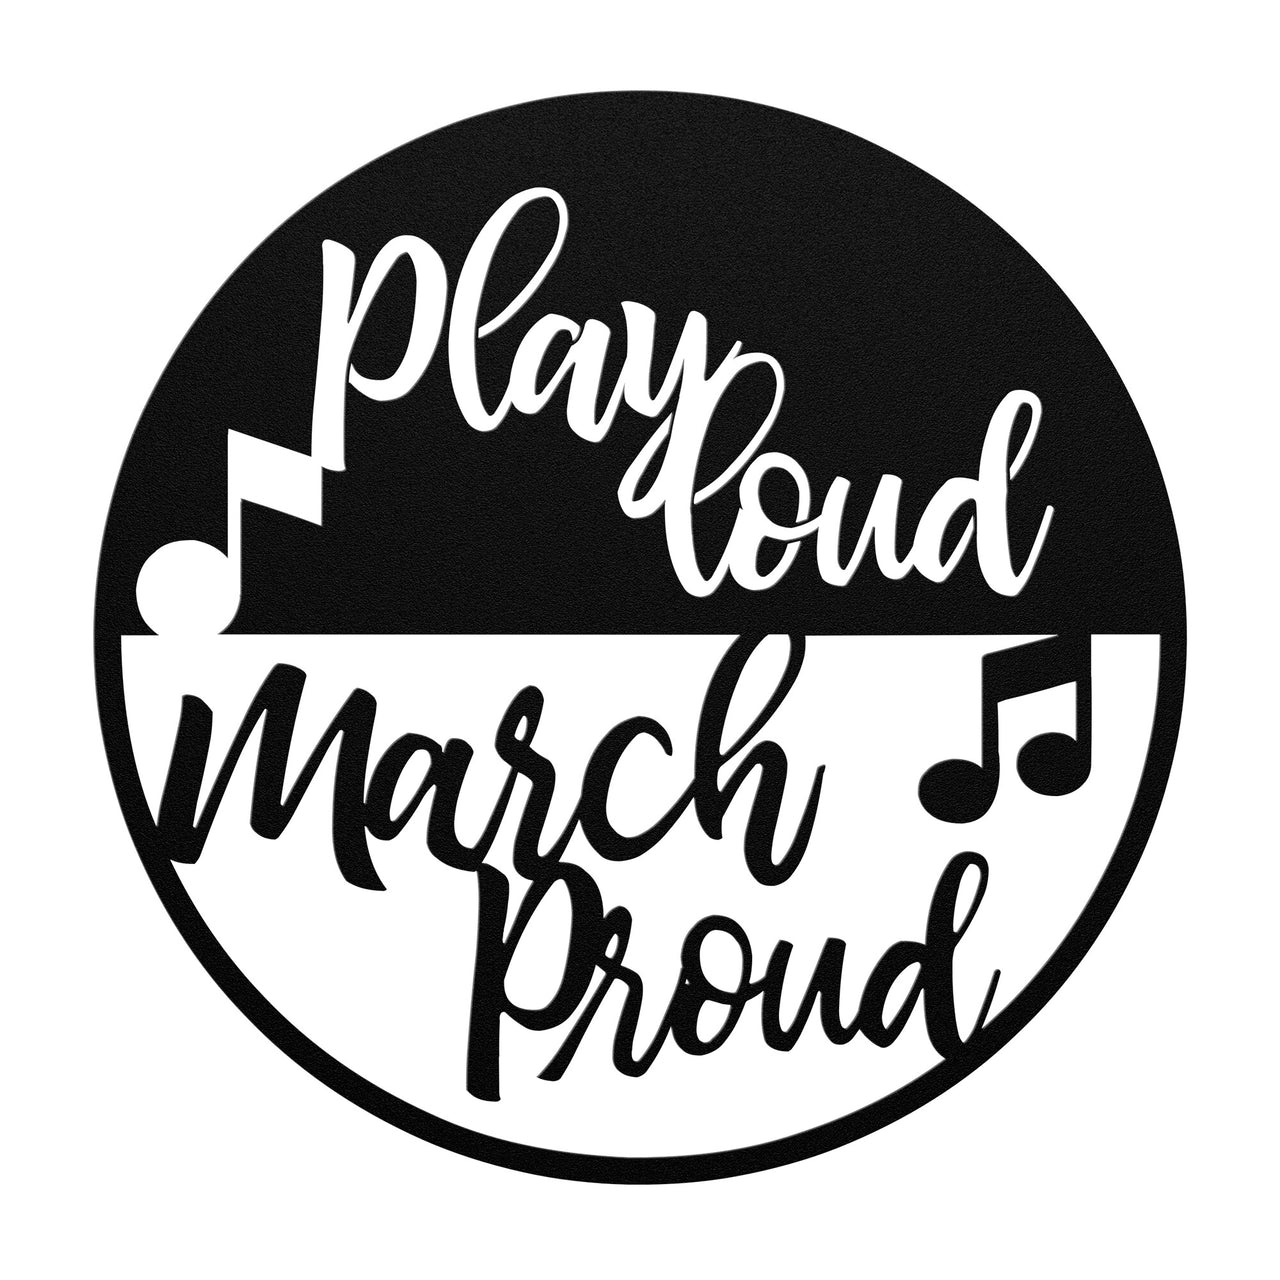 Play loud, March Proud, sign